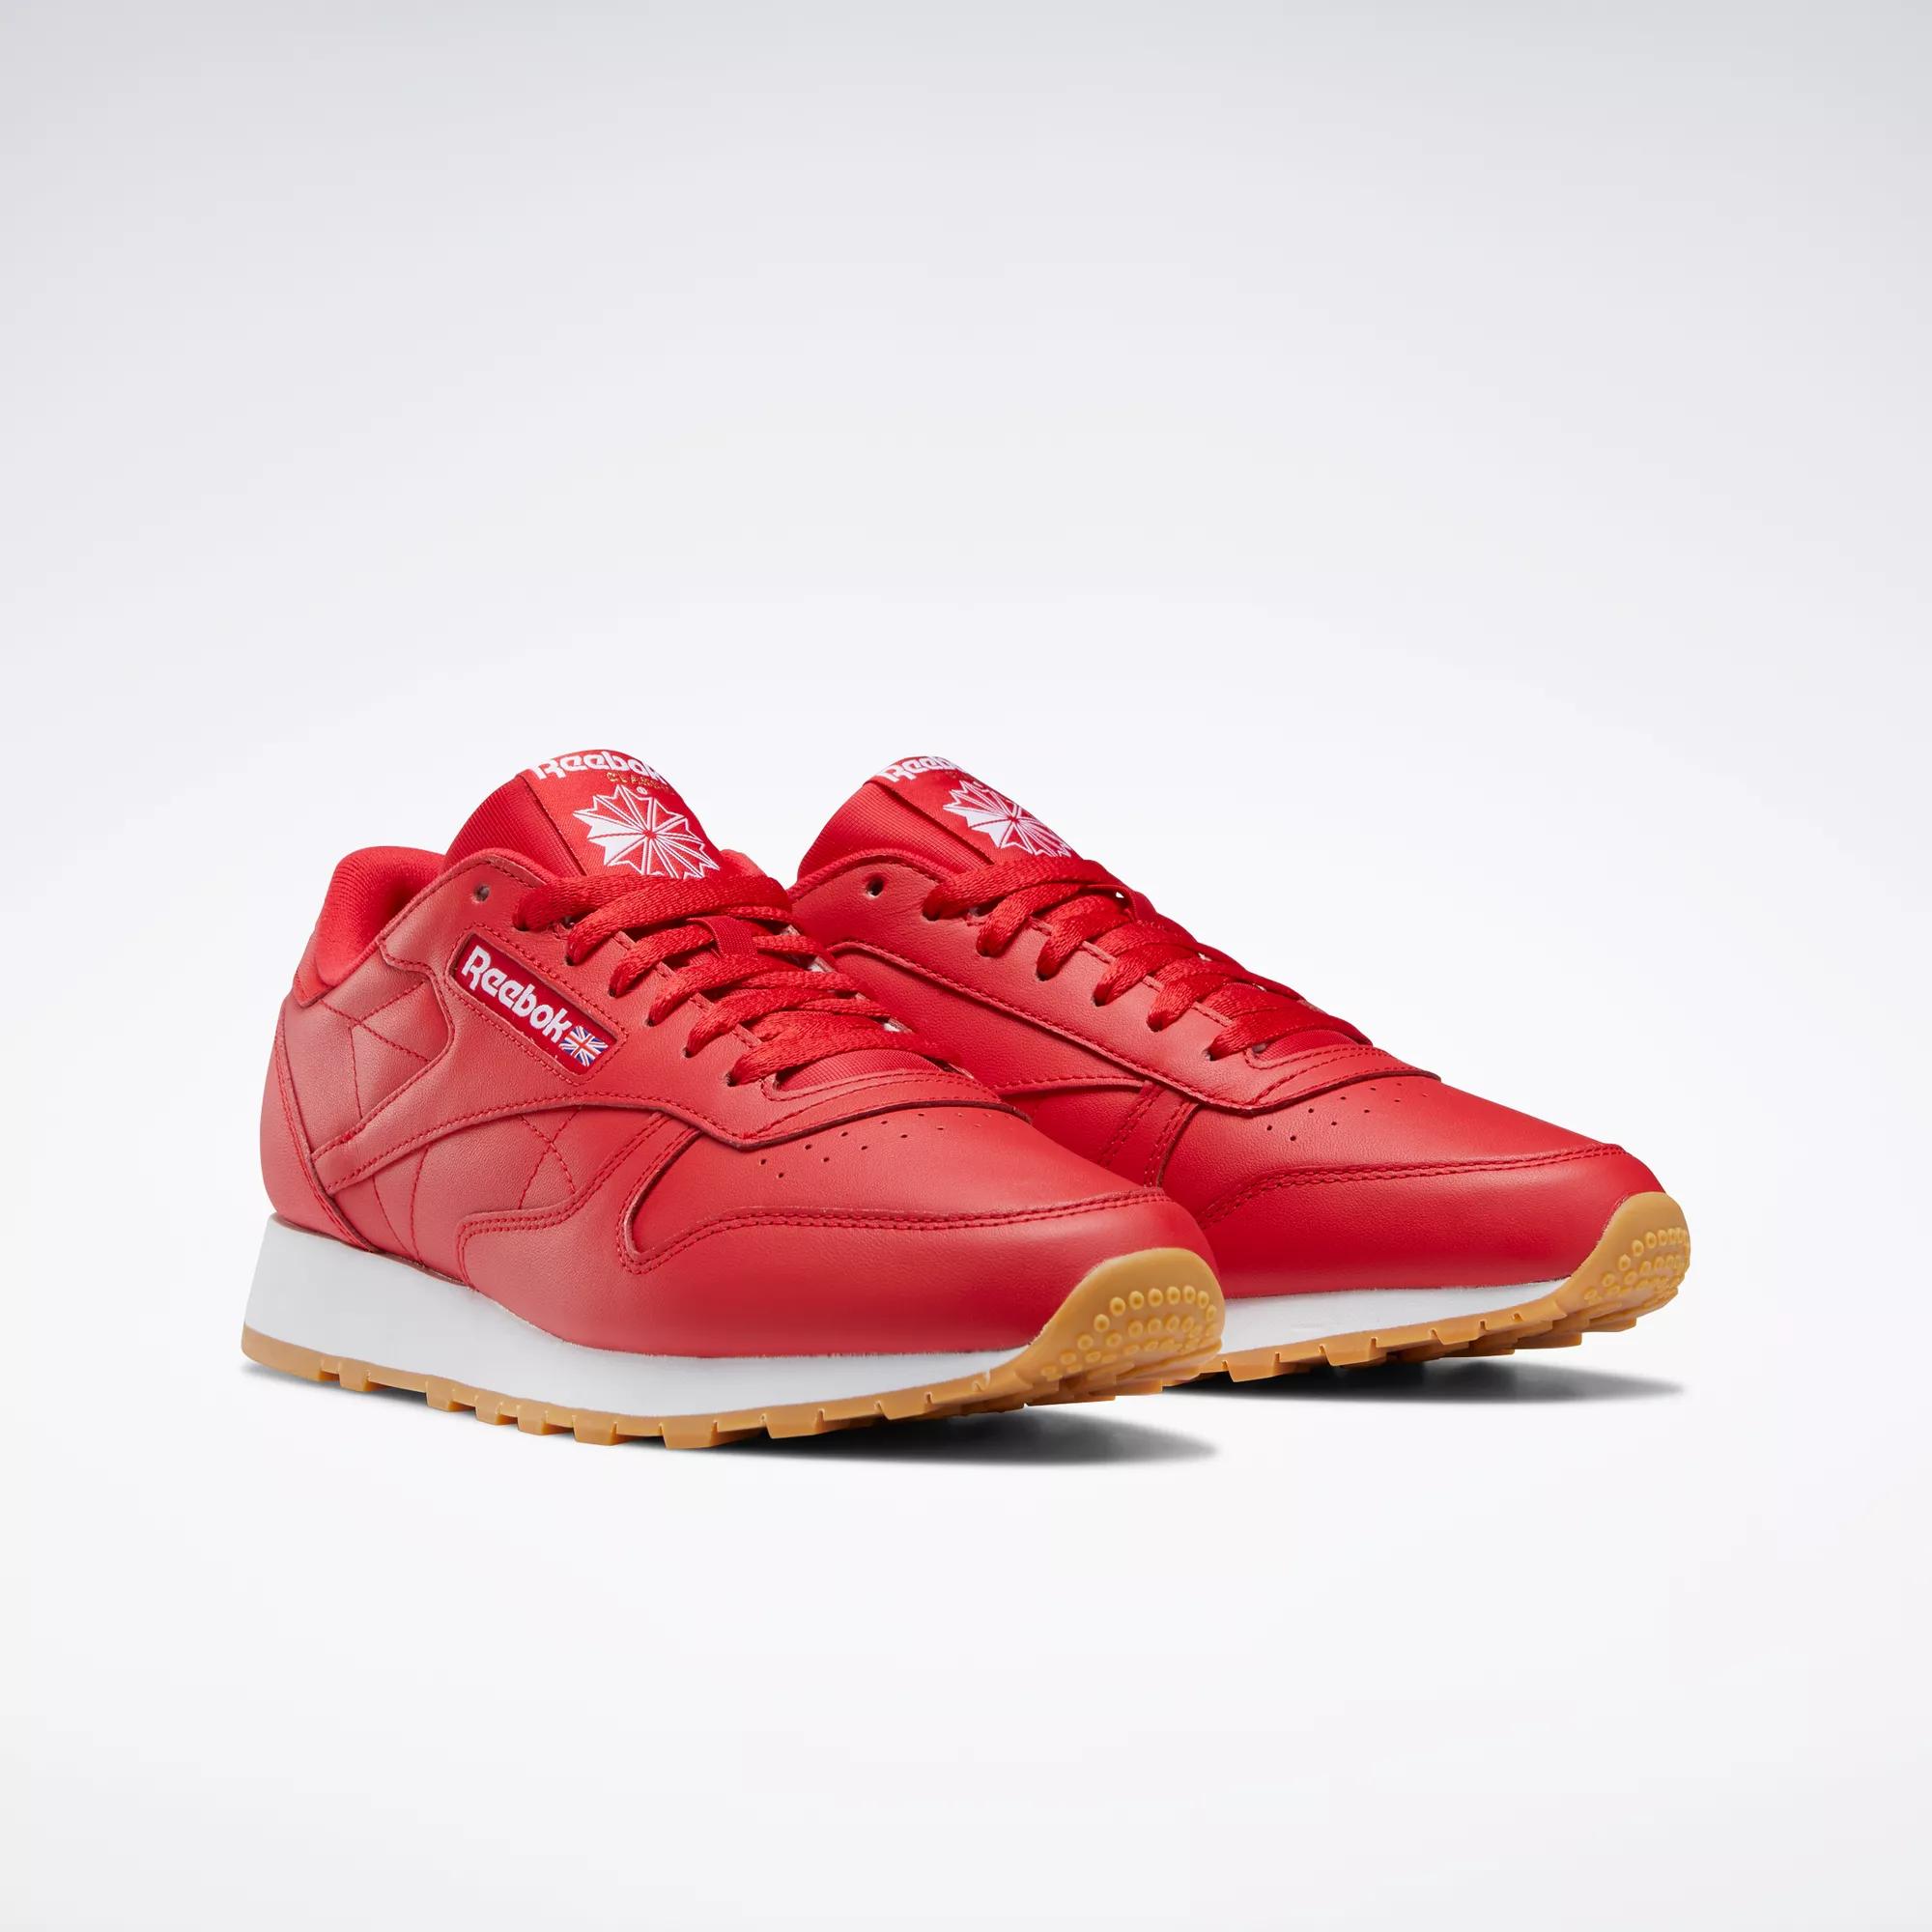 Classic Leather Shoes - Vector | Gum-03 Reebok / White Ftwr Red Rubber / Reebok